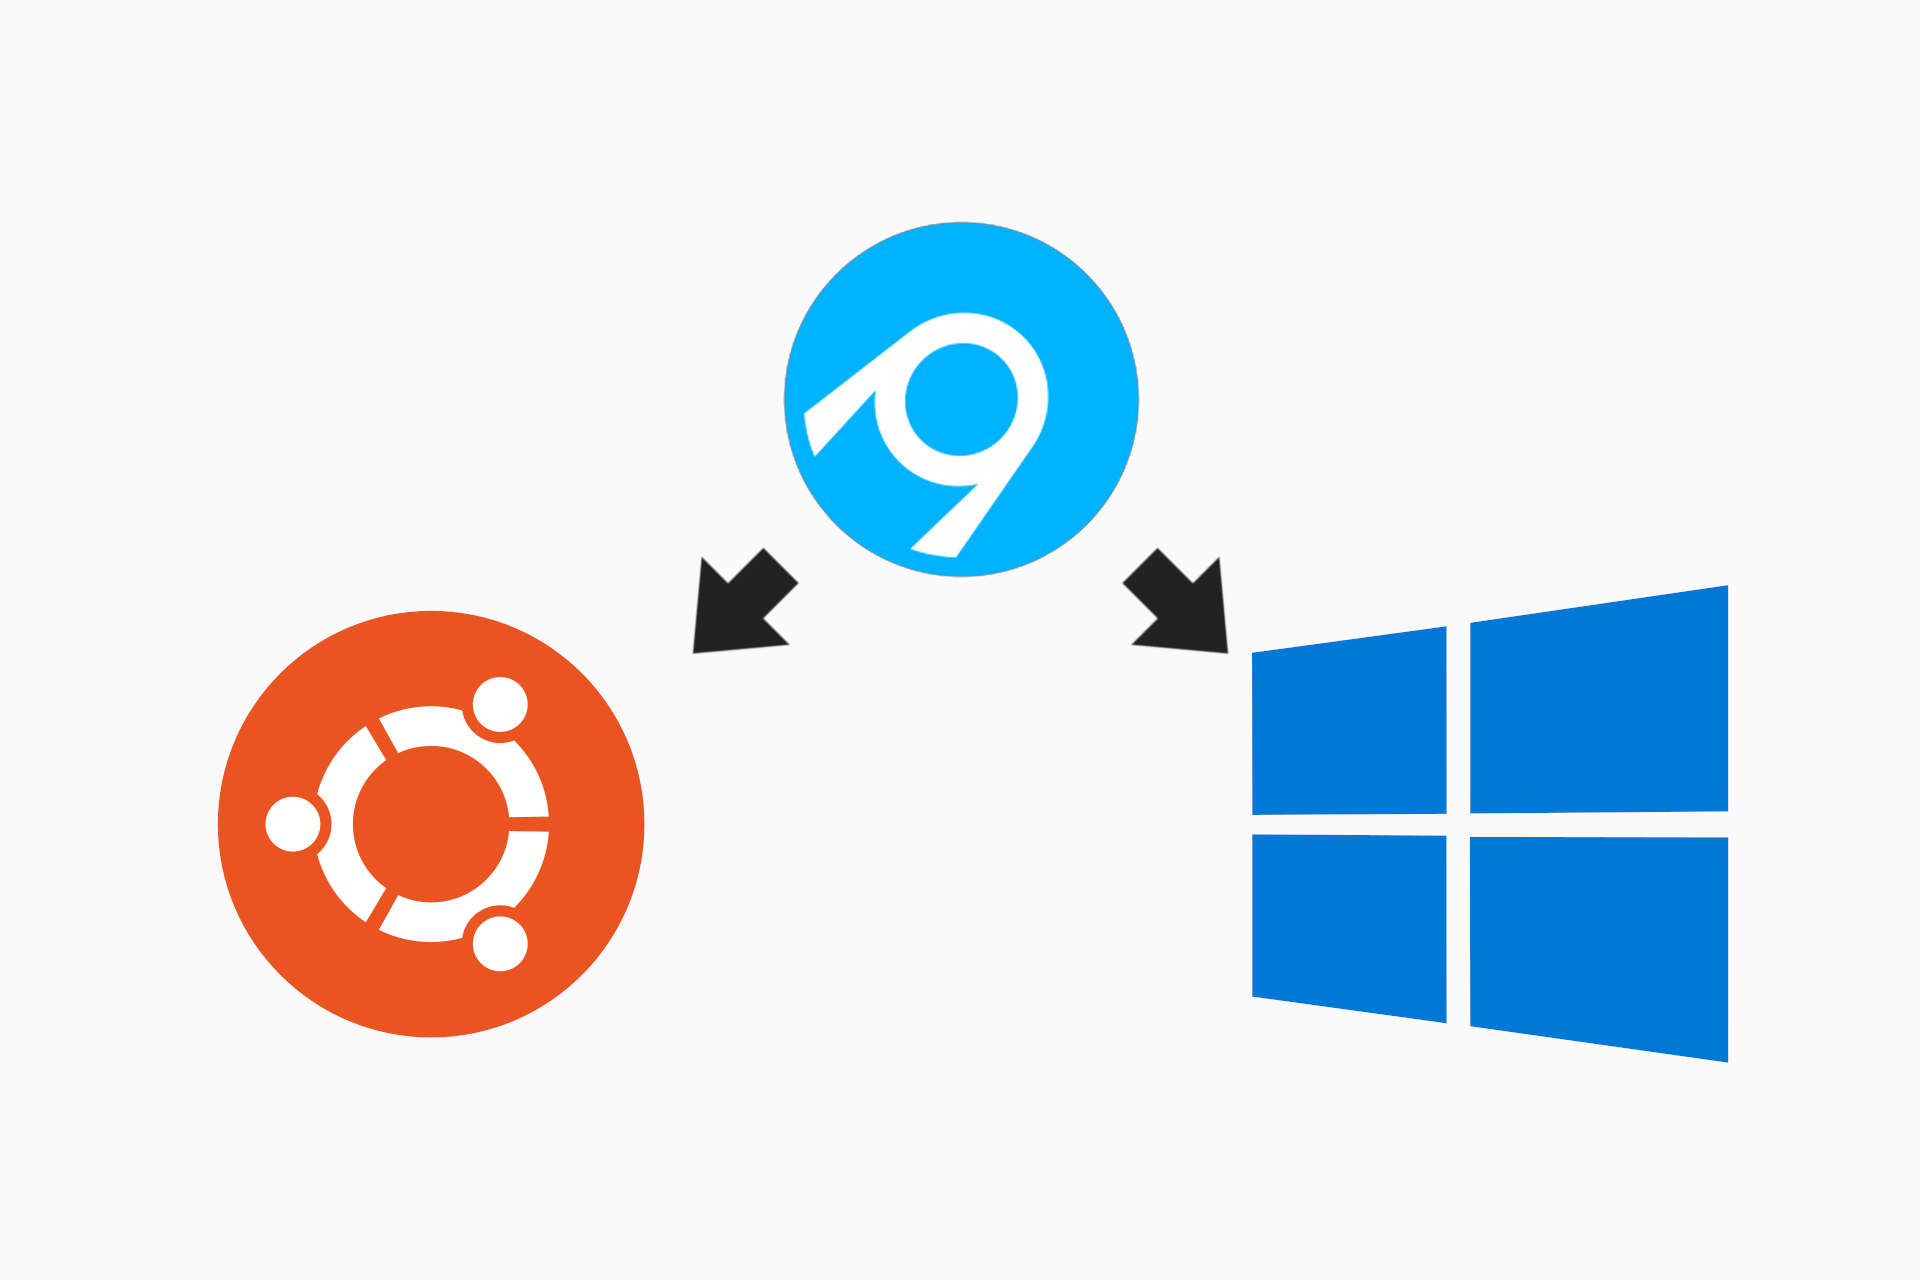 Building ASP.NET Core apps on both Windows and Linux using AppVeyor